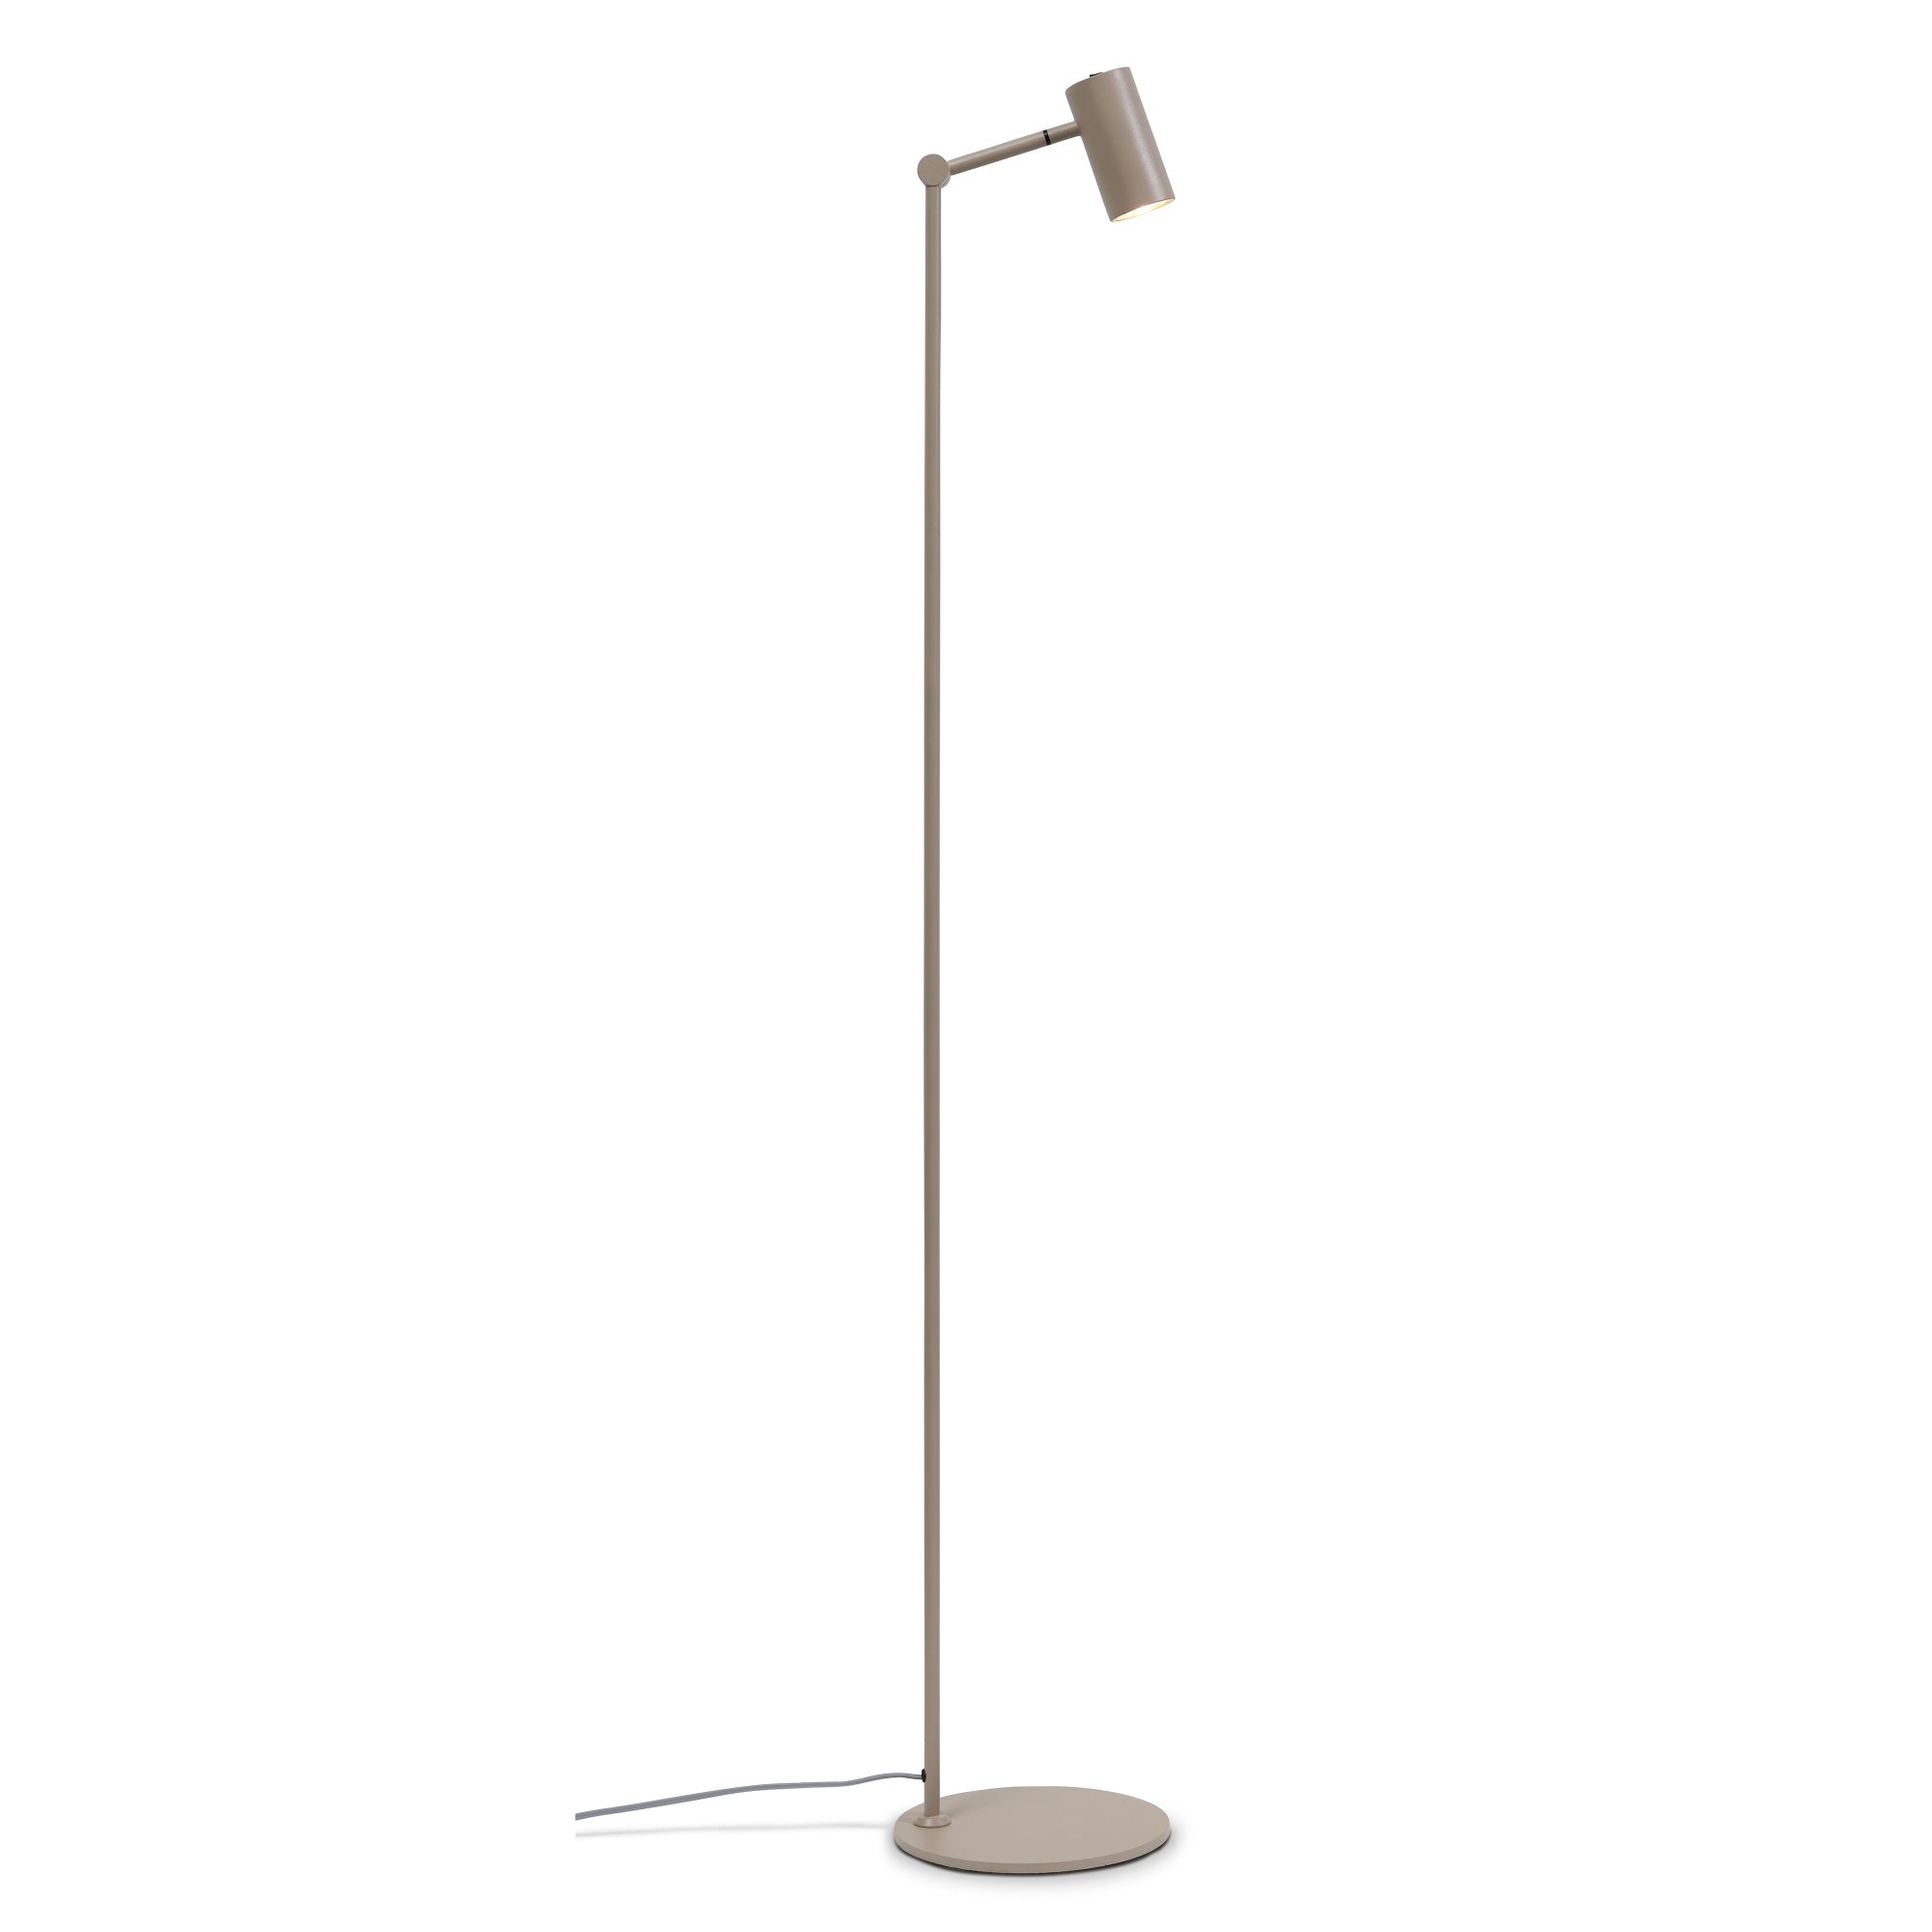 it's about RoMi  Vloerlamp ijzer Montreux LED zand